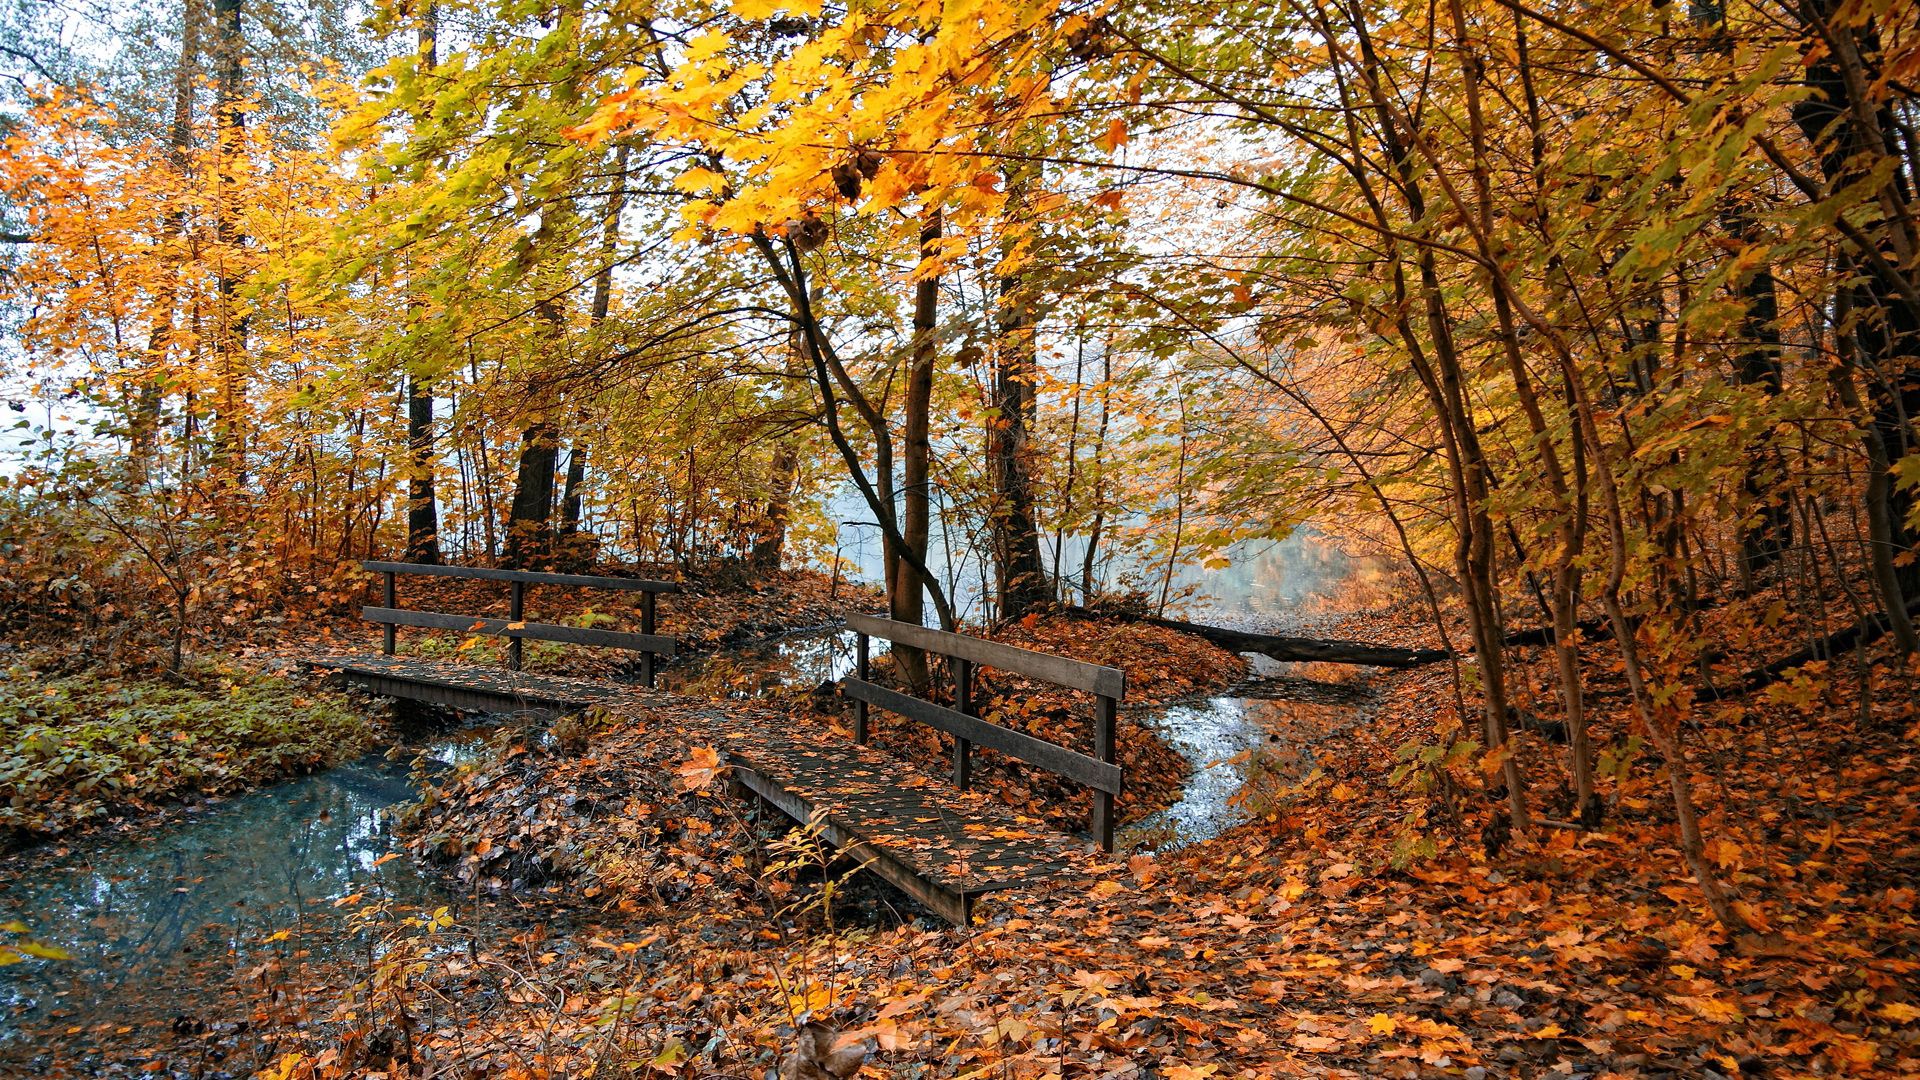 trees, leaves, forest, nature, bridges, yellow, autumn, water